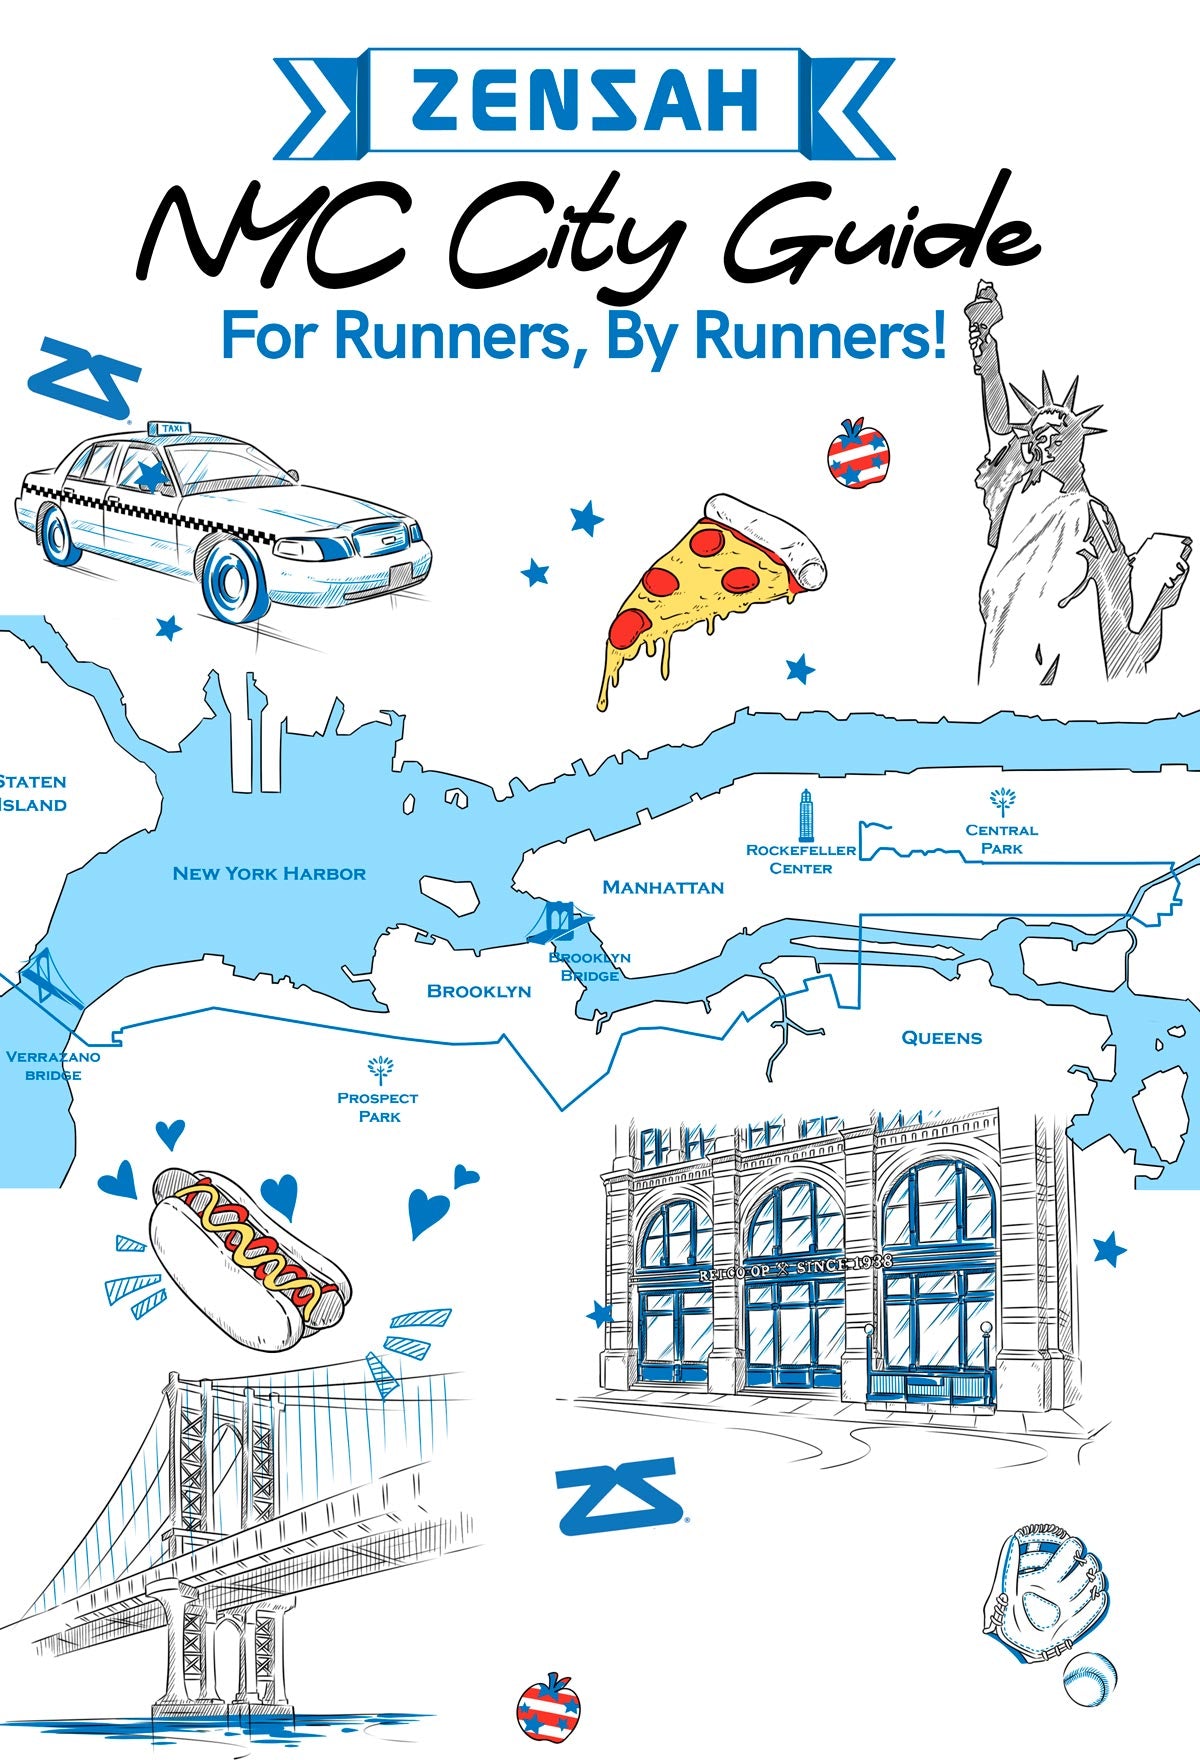 NYC City Guide for Runners